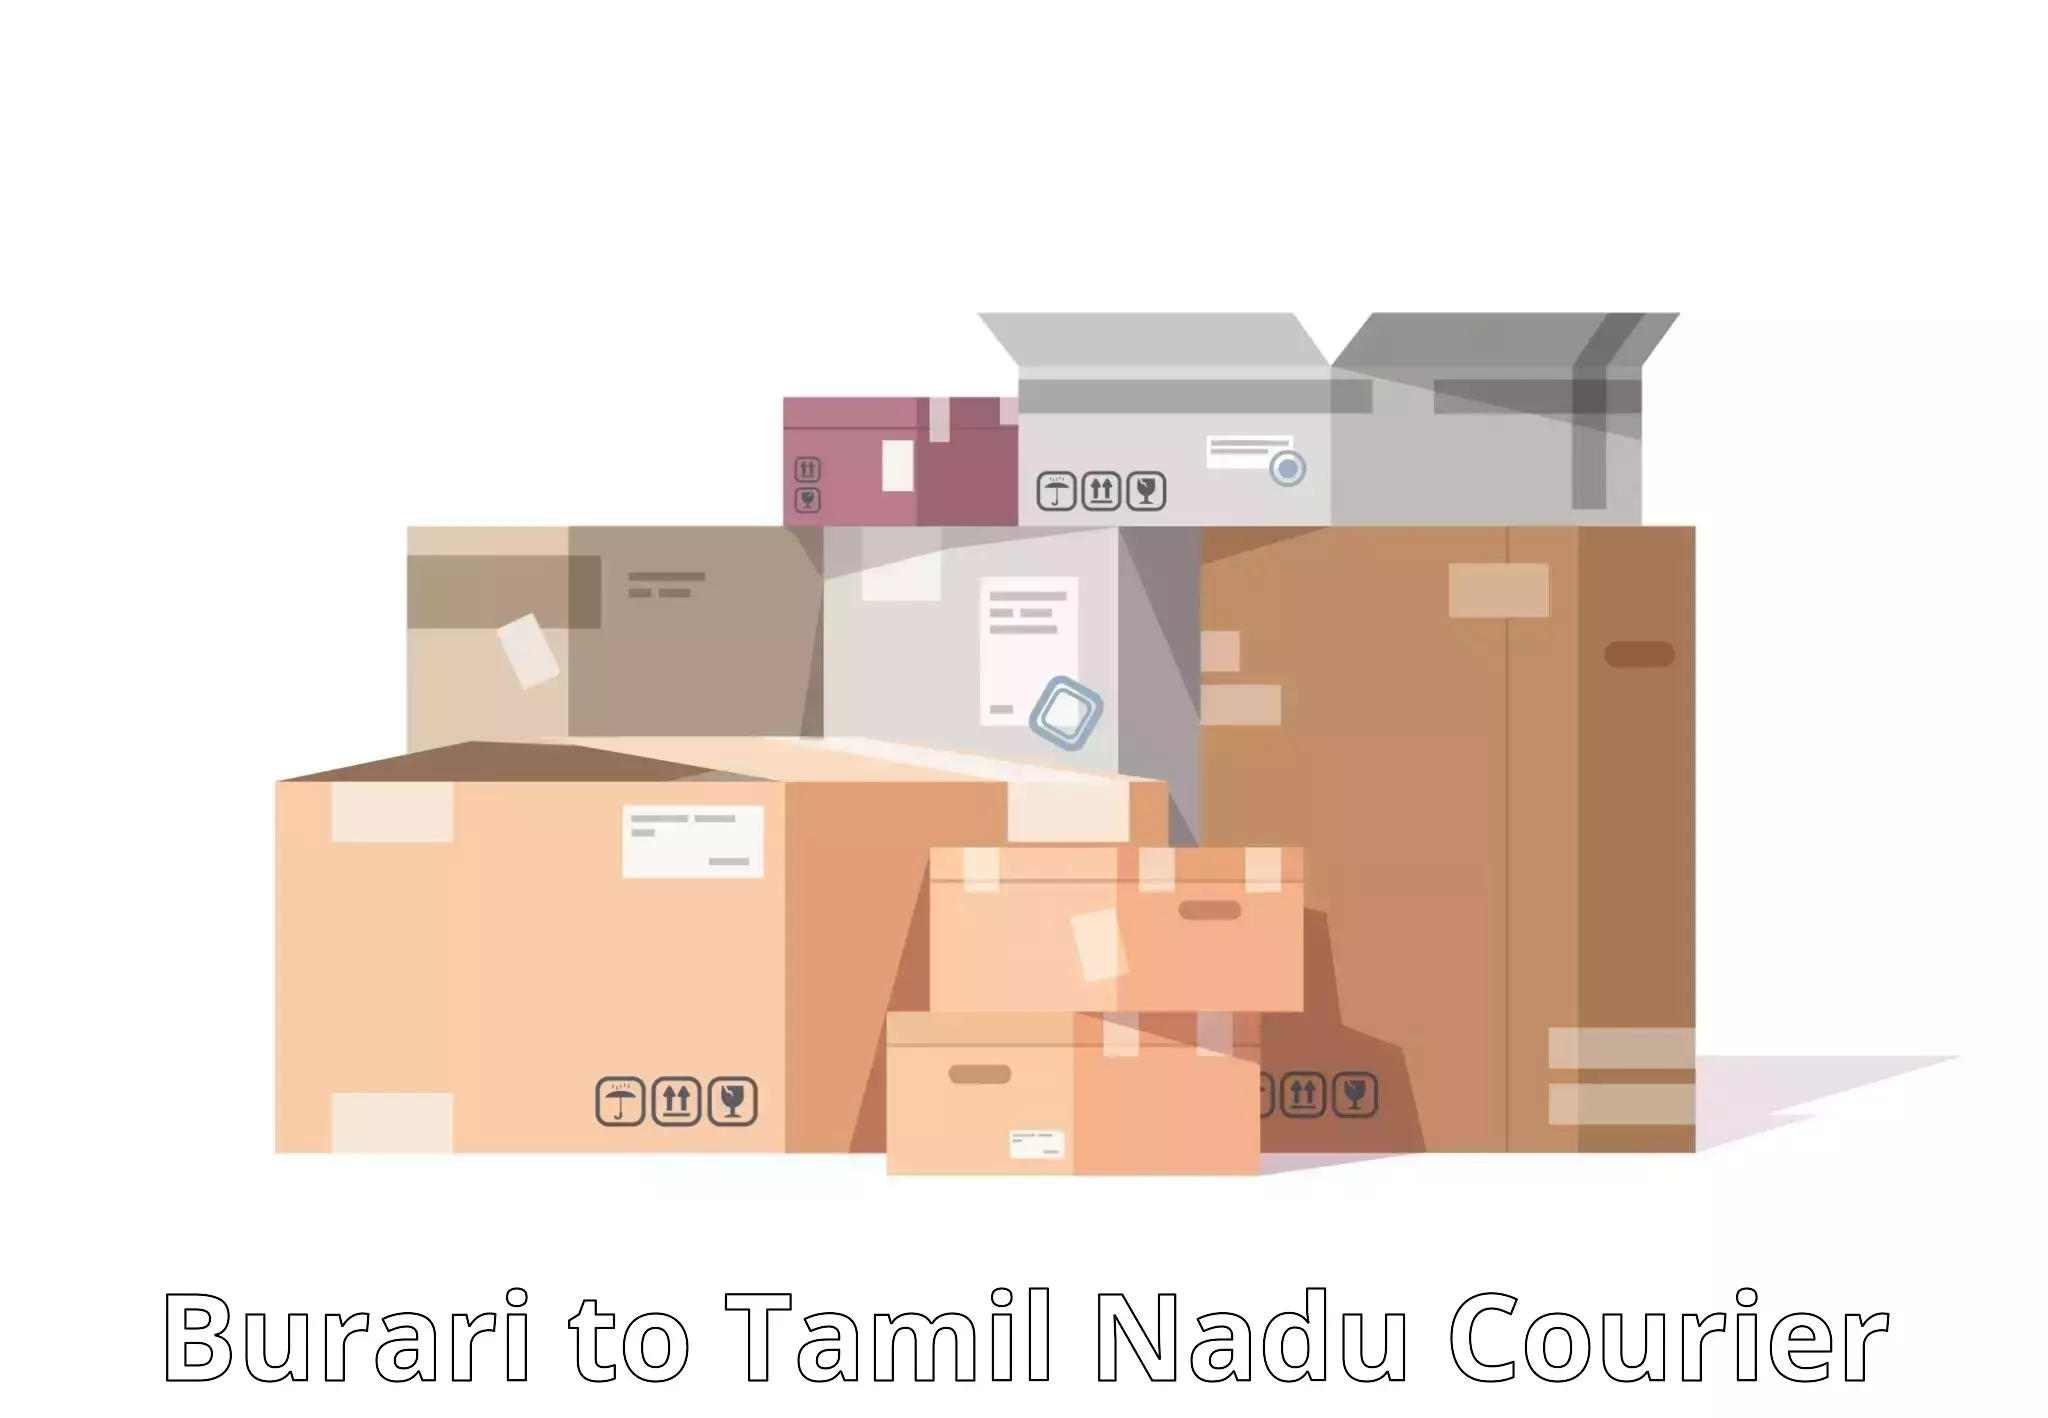 Large-scale shipping solutions in Burari to Tamil Nadu